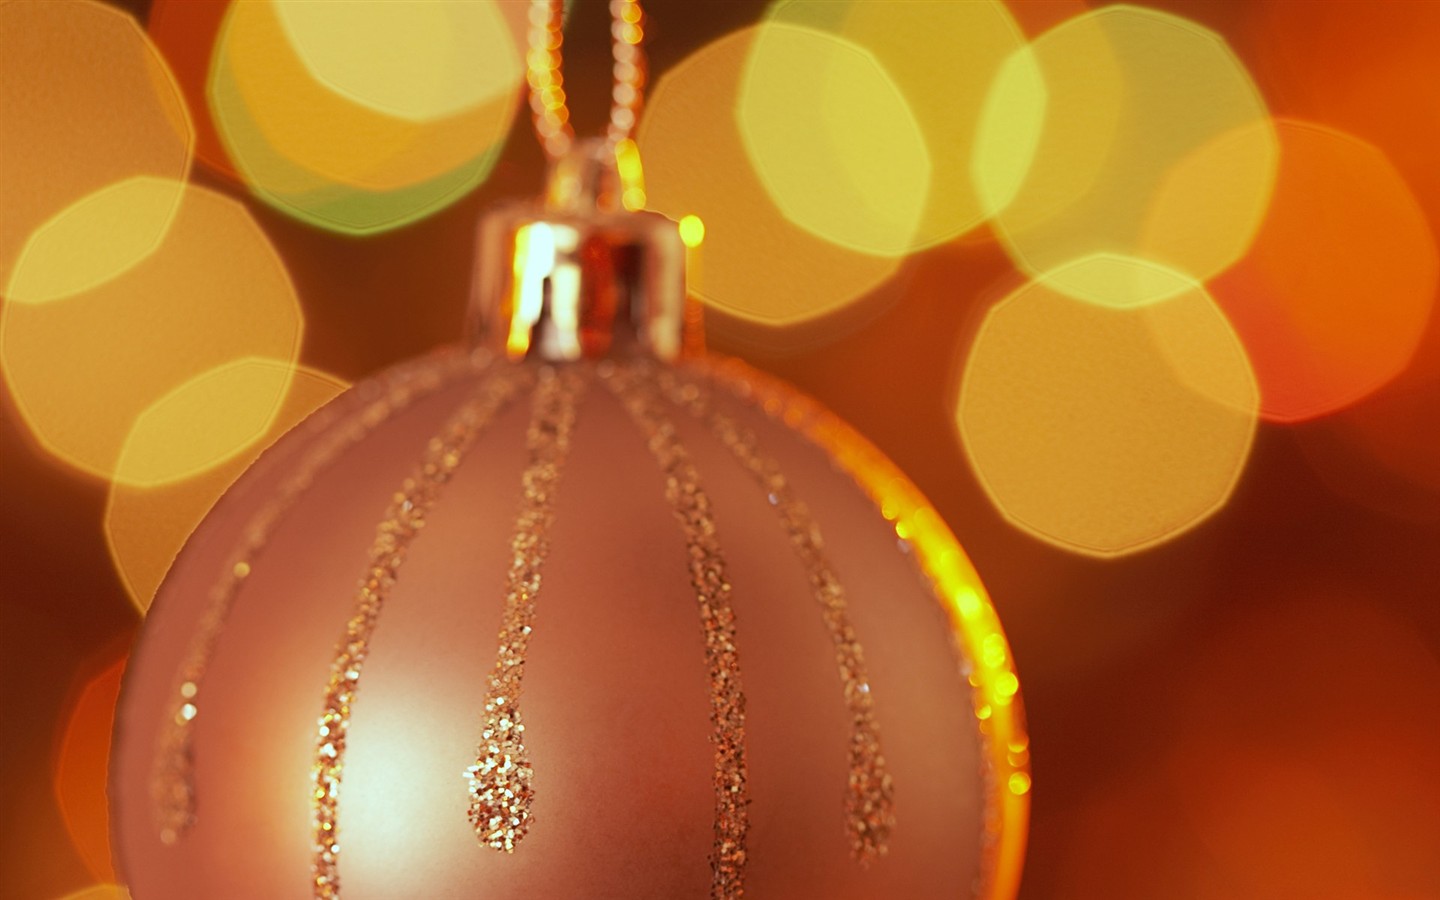 Happy Christmas decorations wallpapers #17 - 1440x900